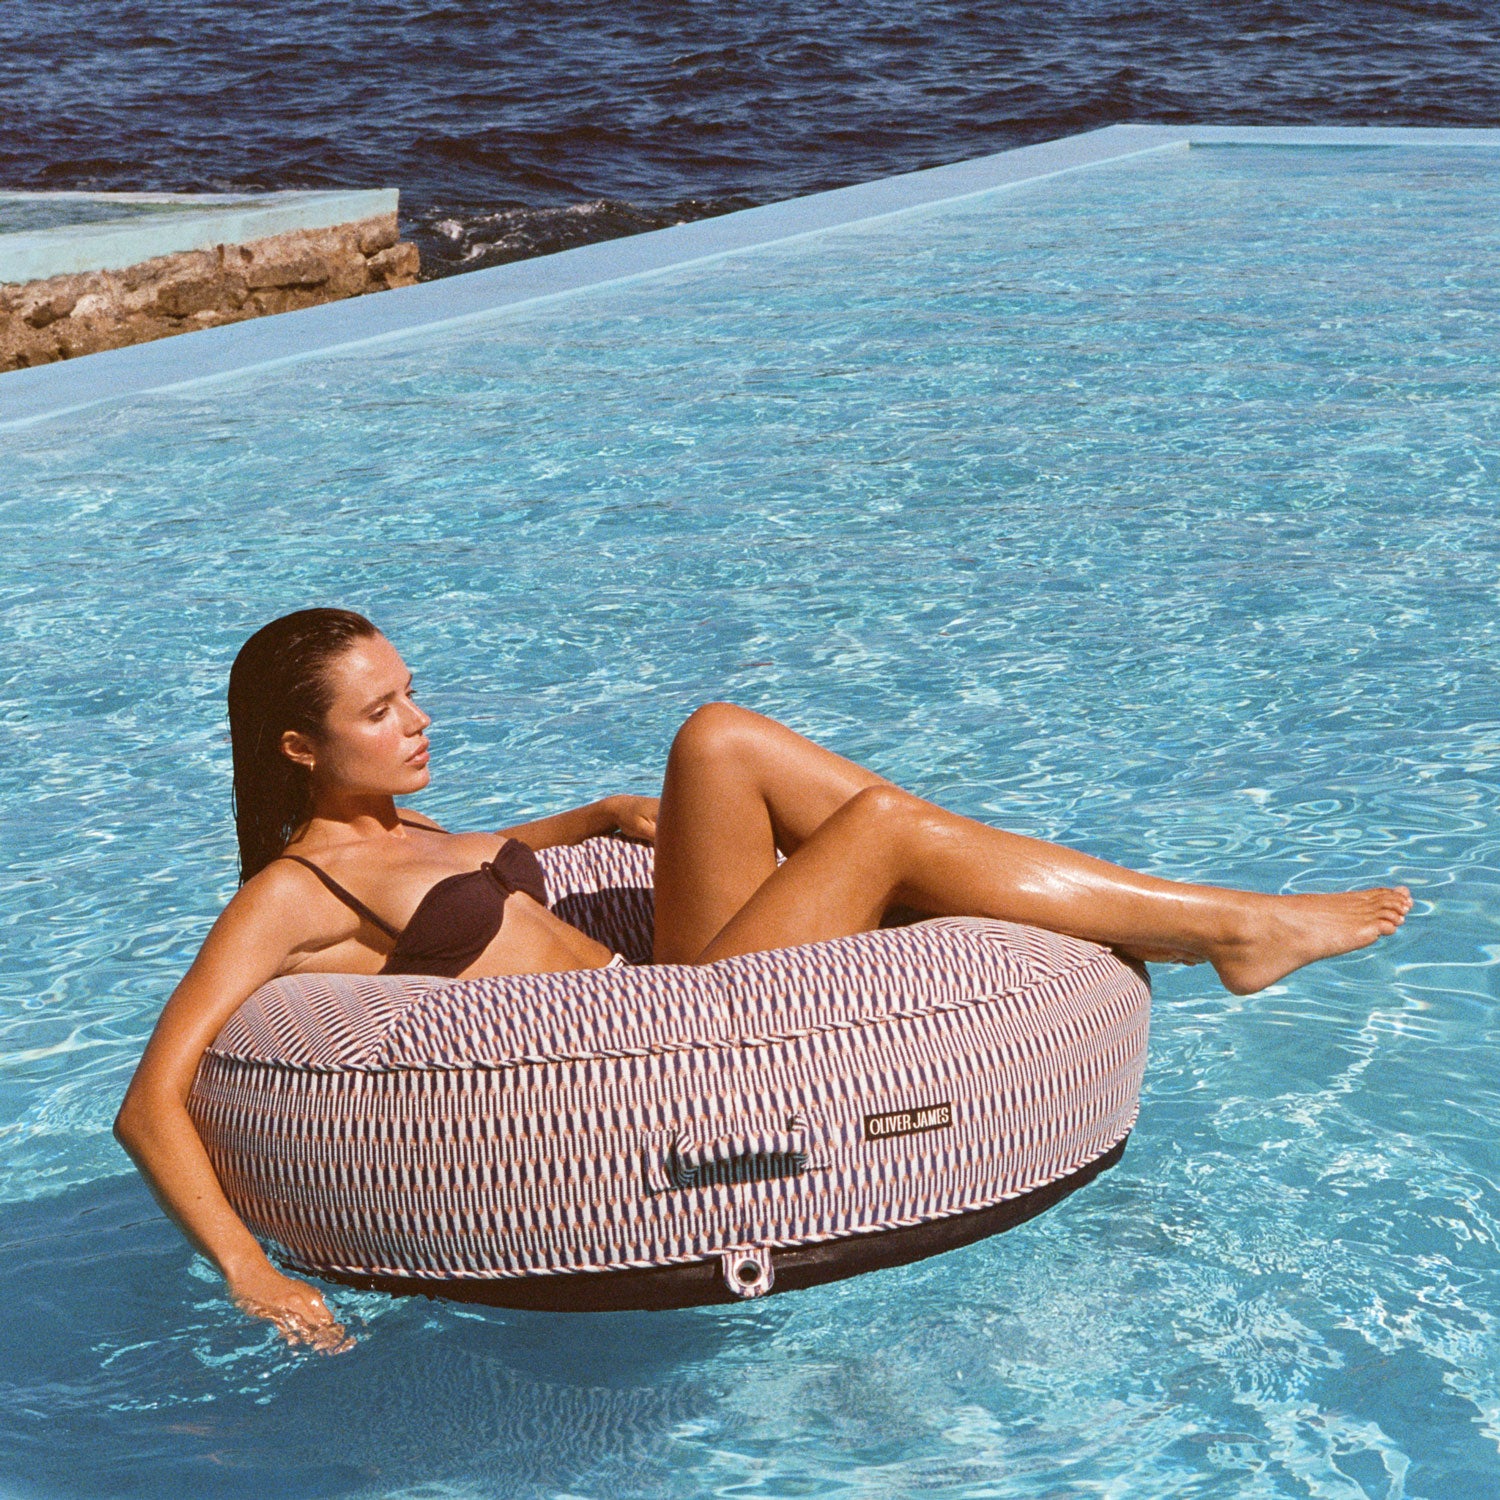 A women on a red, white and orange ring pool float lounger for adults floating in a swimming pool with the ocean in the background.